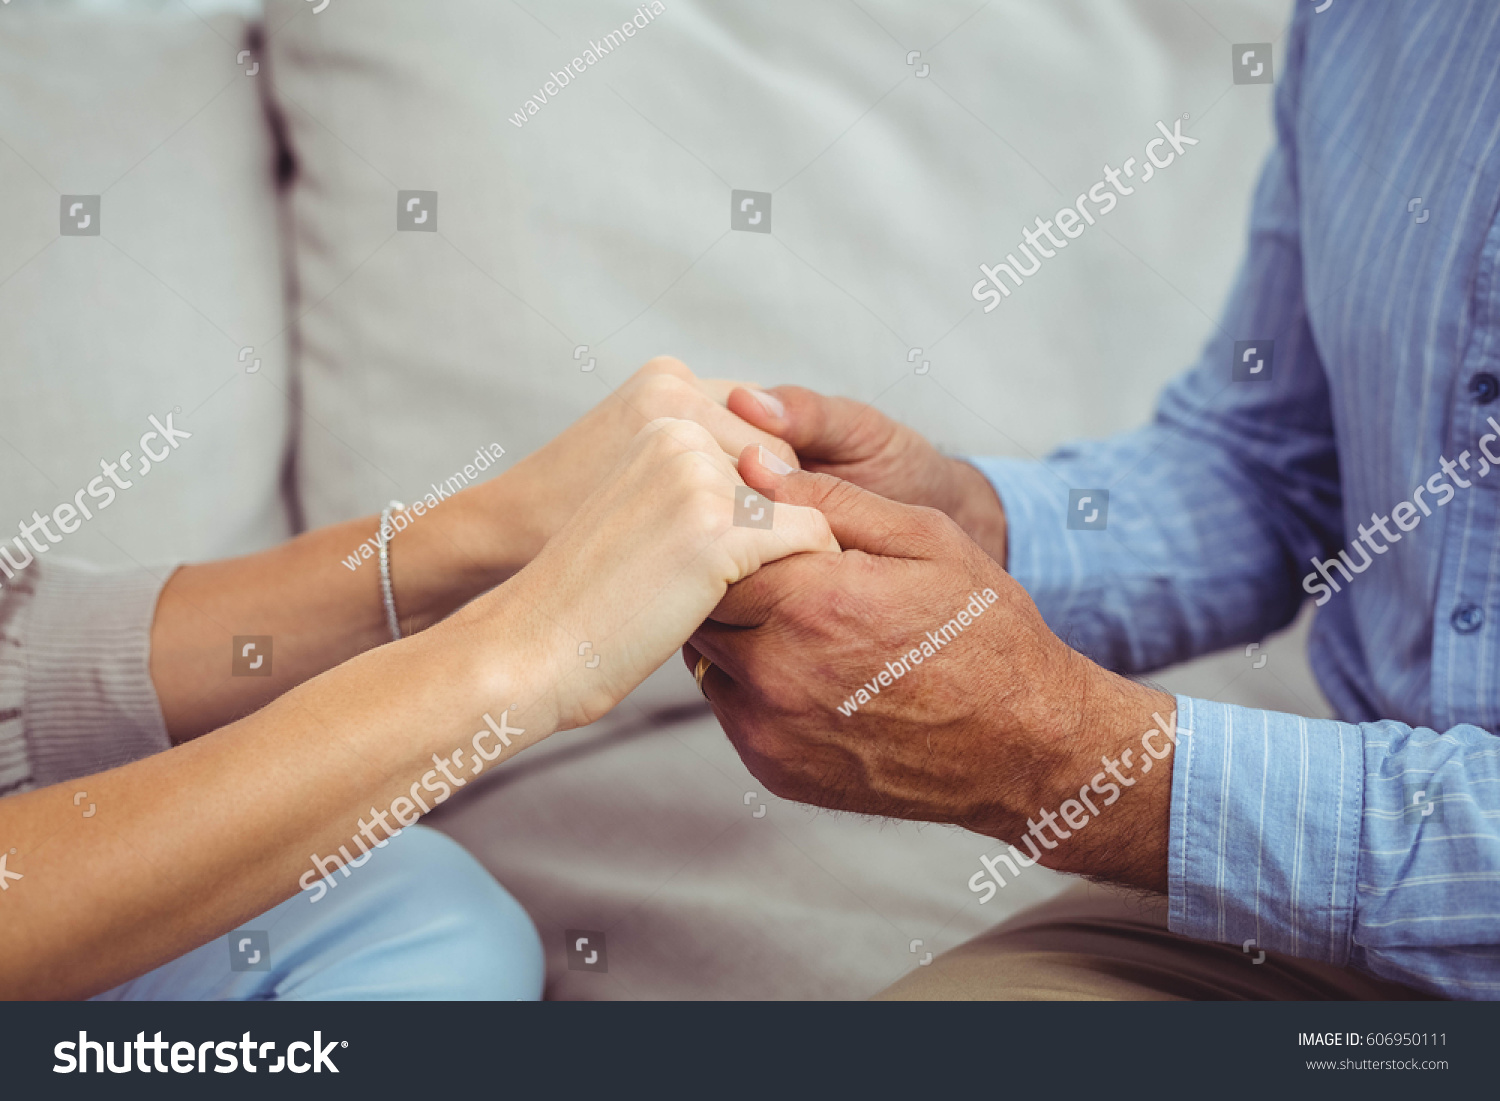 Close-up of man and woman holding hands at home #606950111